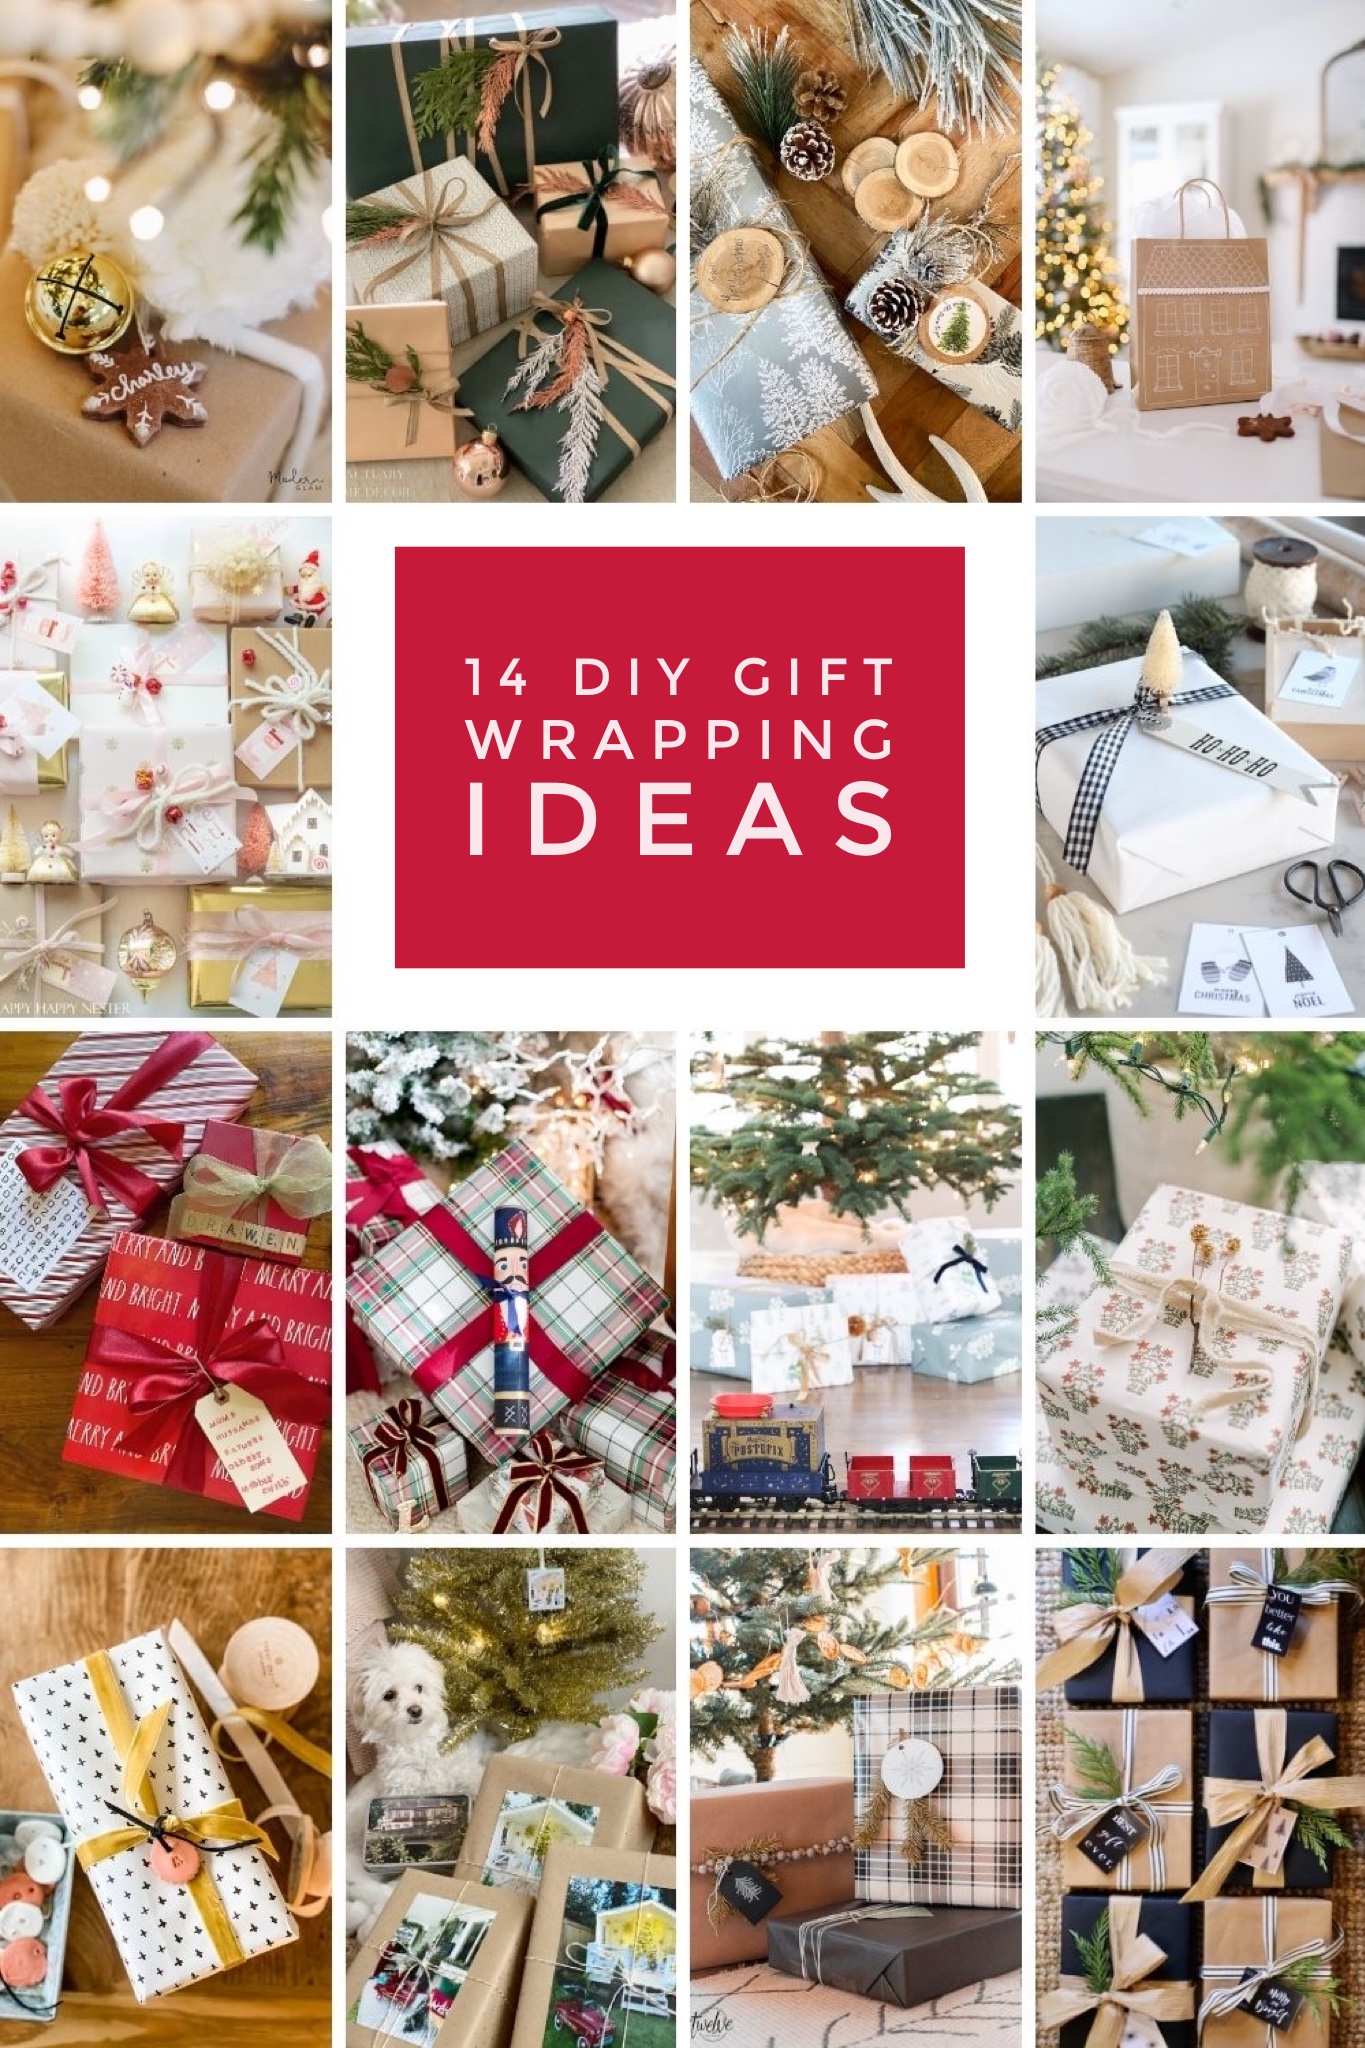 14 DIY Gift Wrapping Ideas poster.